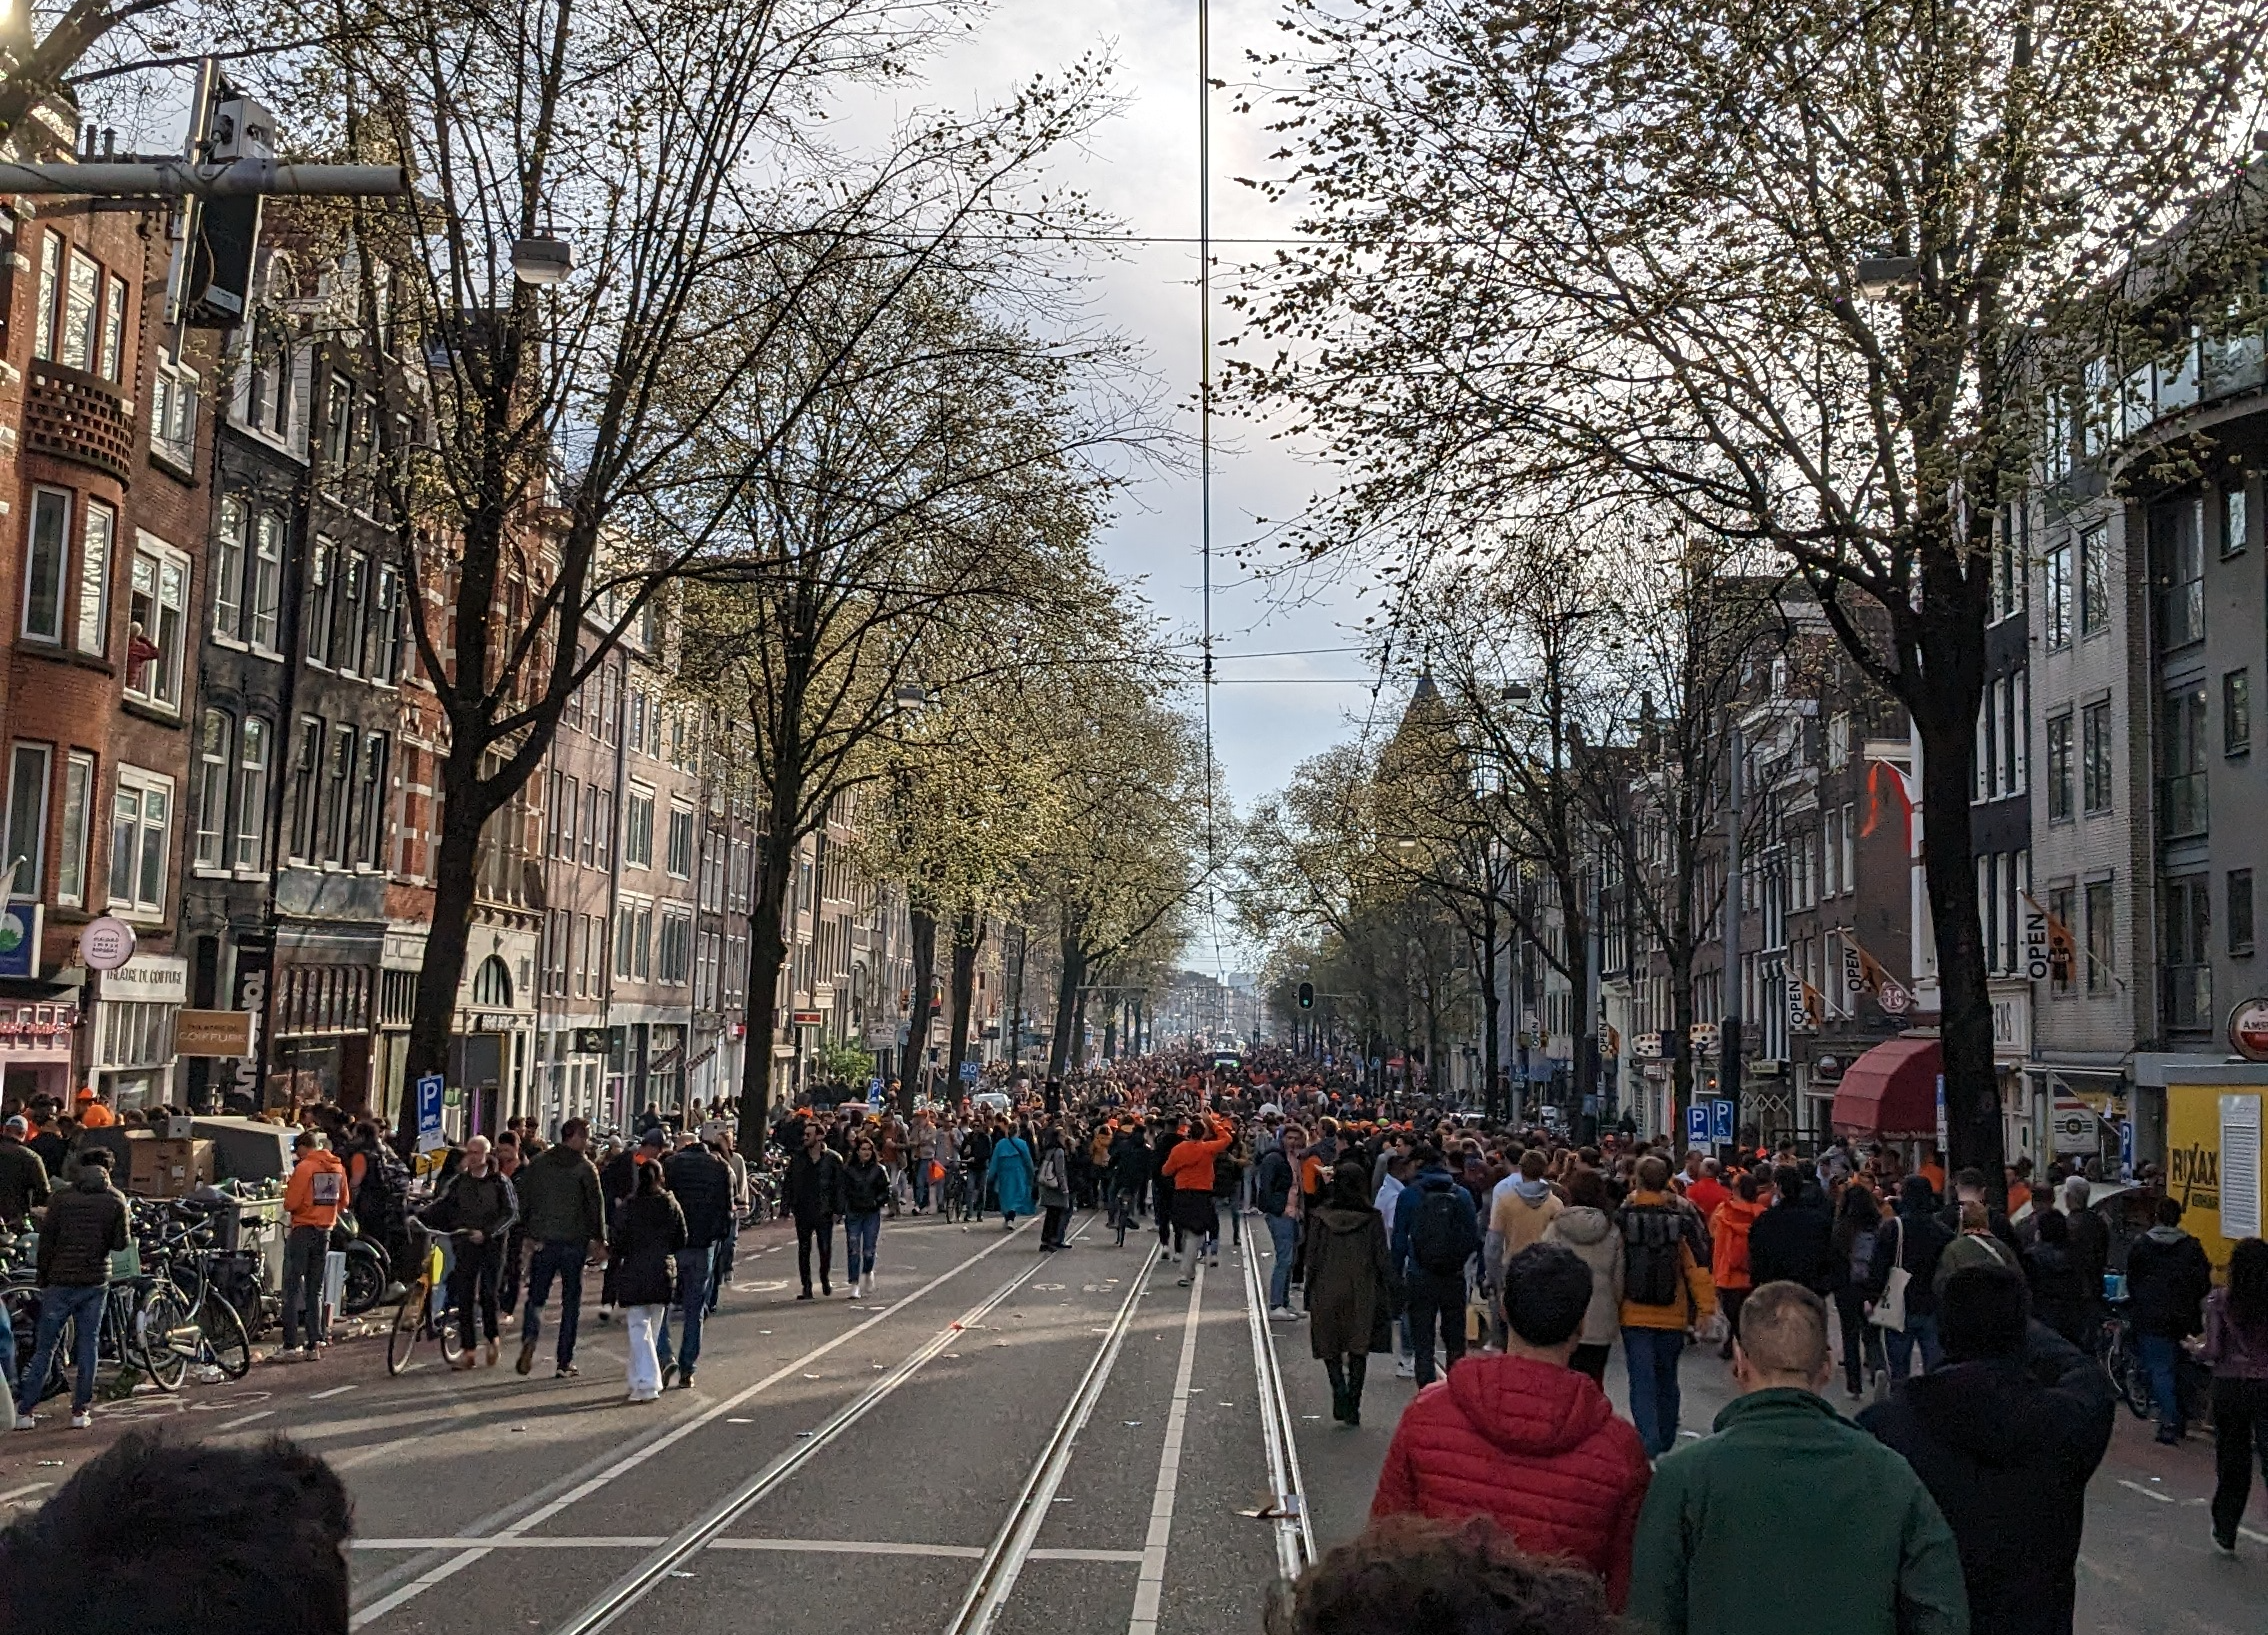 Crowd in Amsterdam Centrum during King's day